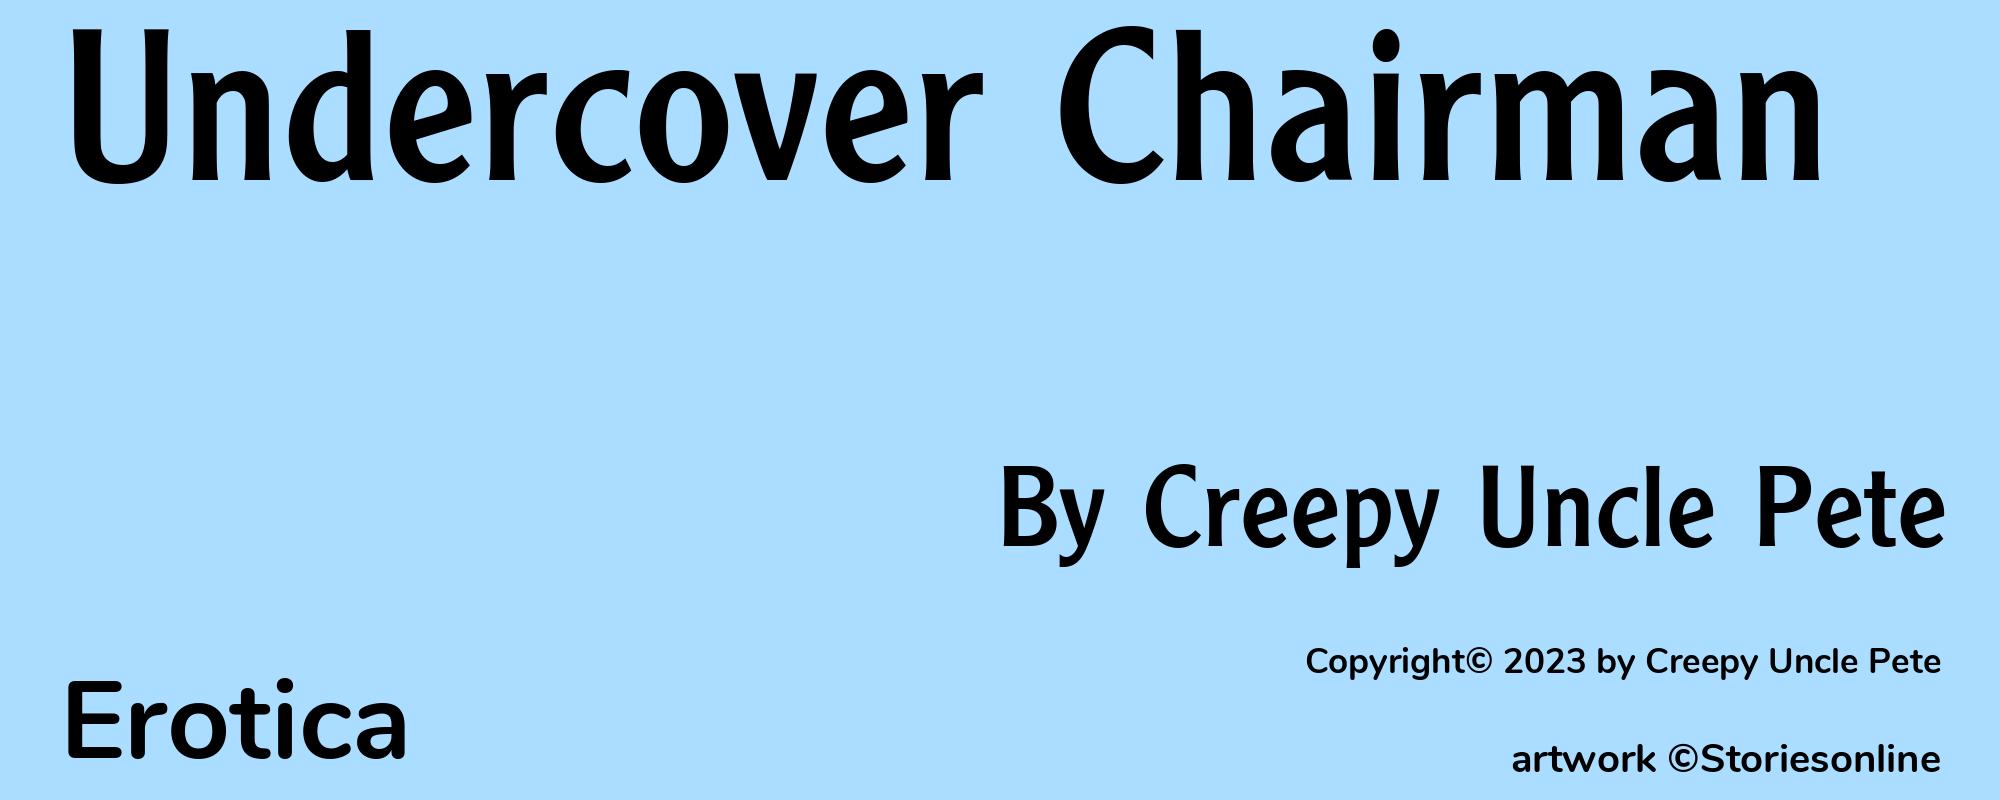 Undercover Chairman - Cover